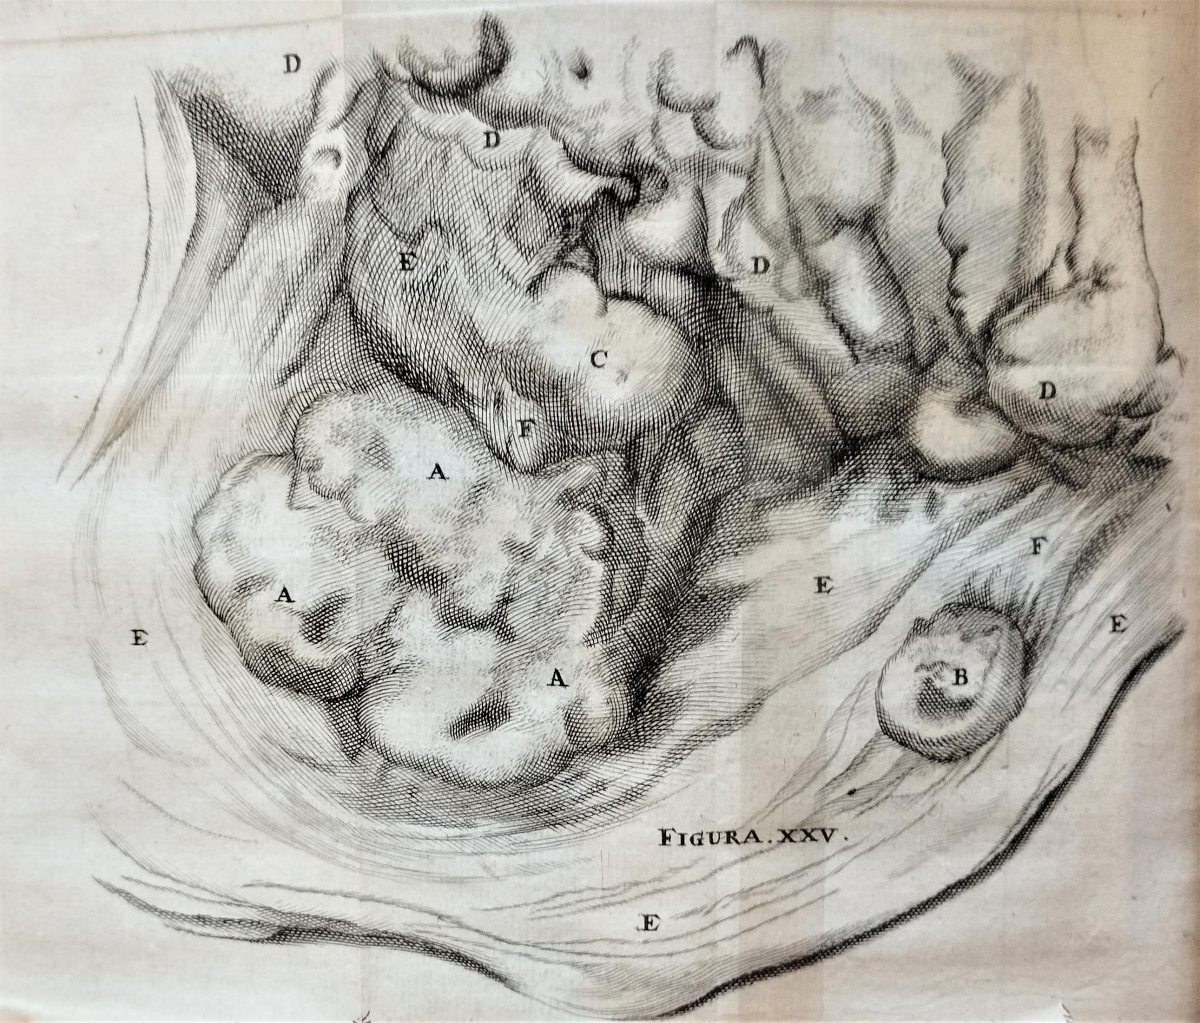 Engraved illustration of a part of the placenta, section highlighted with different letters.